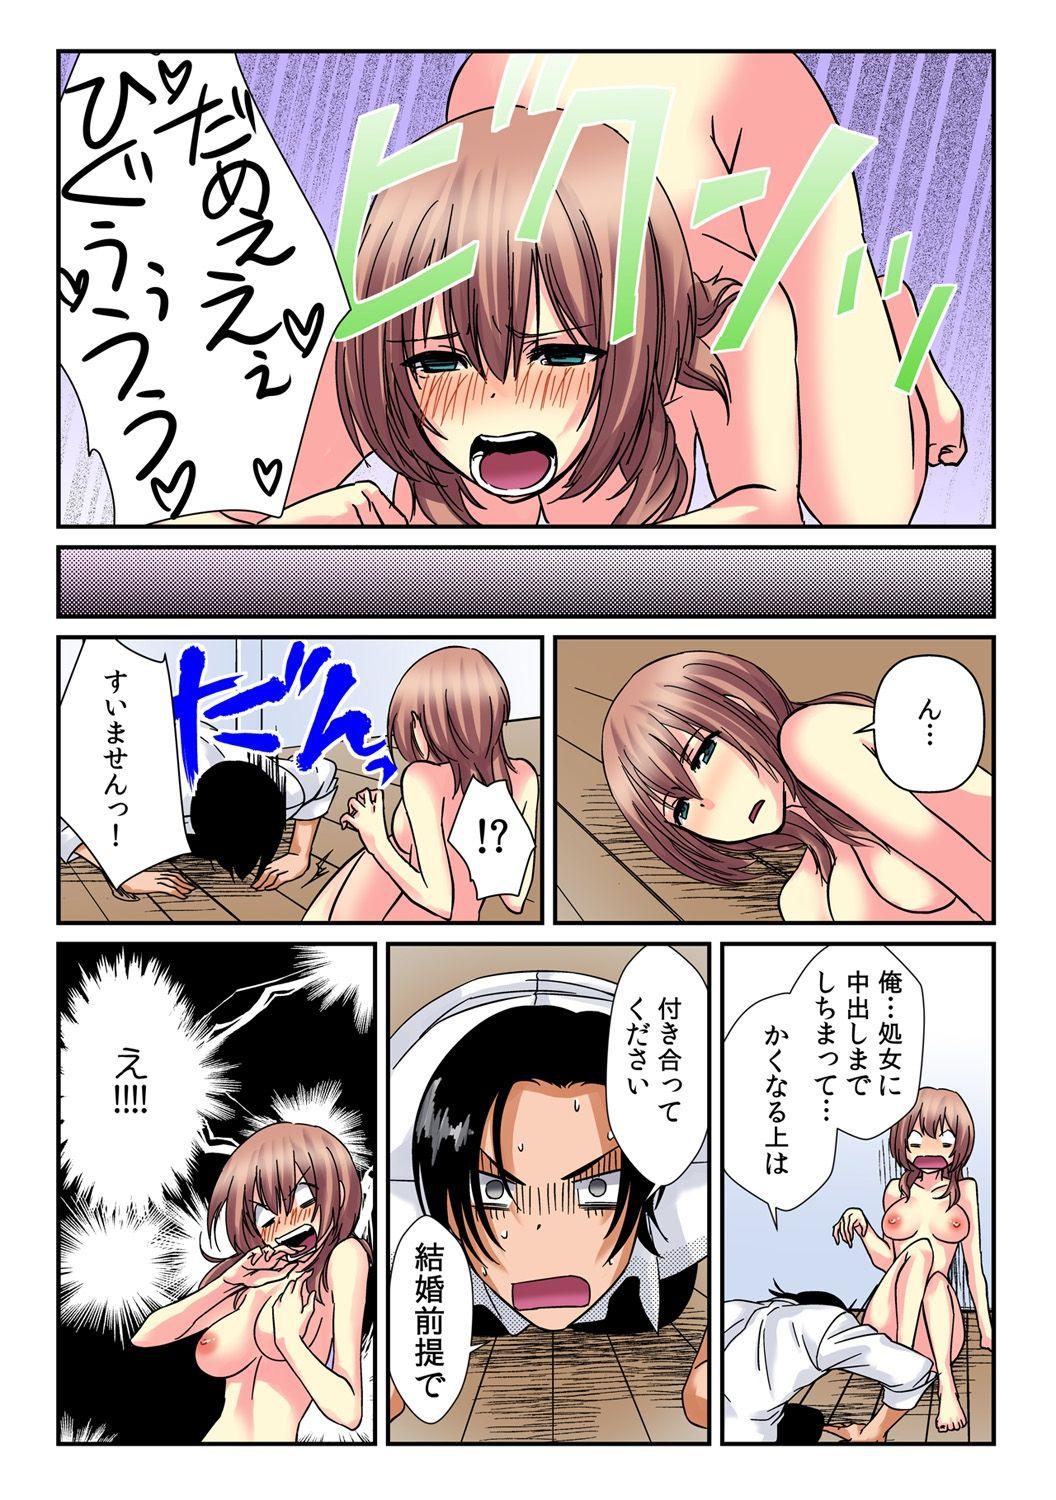 [Akagi Gijou / Akahige] I became a girl- and I definitely can't let anyone find out! (Full color) 1 21